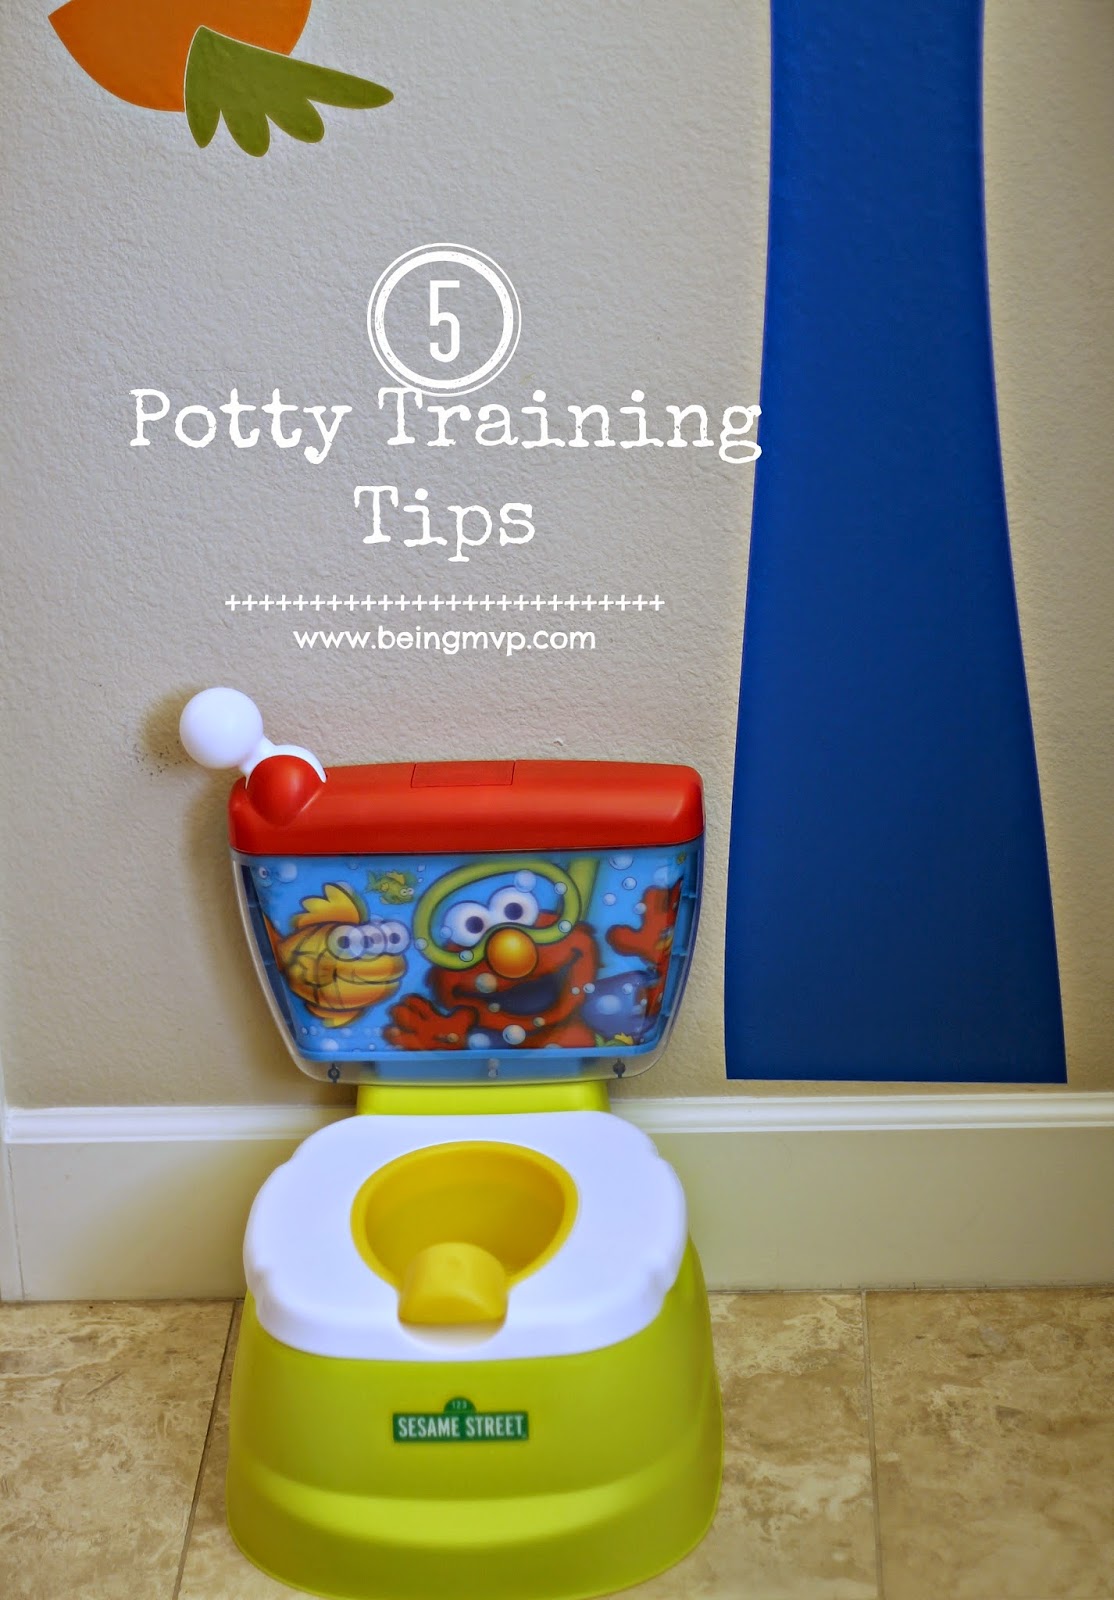 Being Mvp 5 Potty Training Tips Giveaway Readytopotty